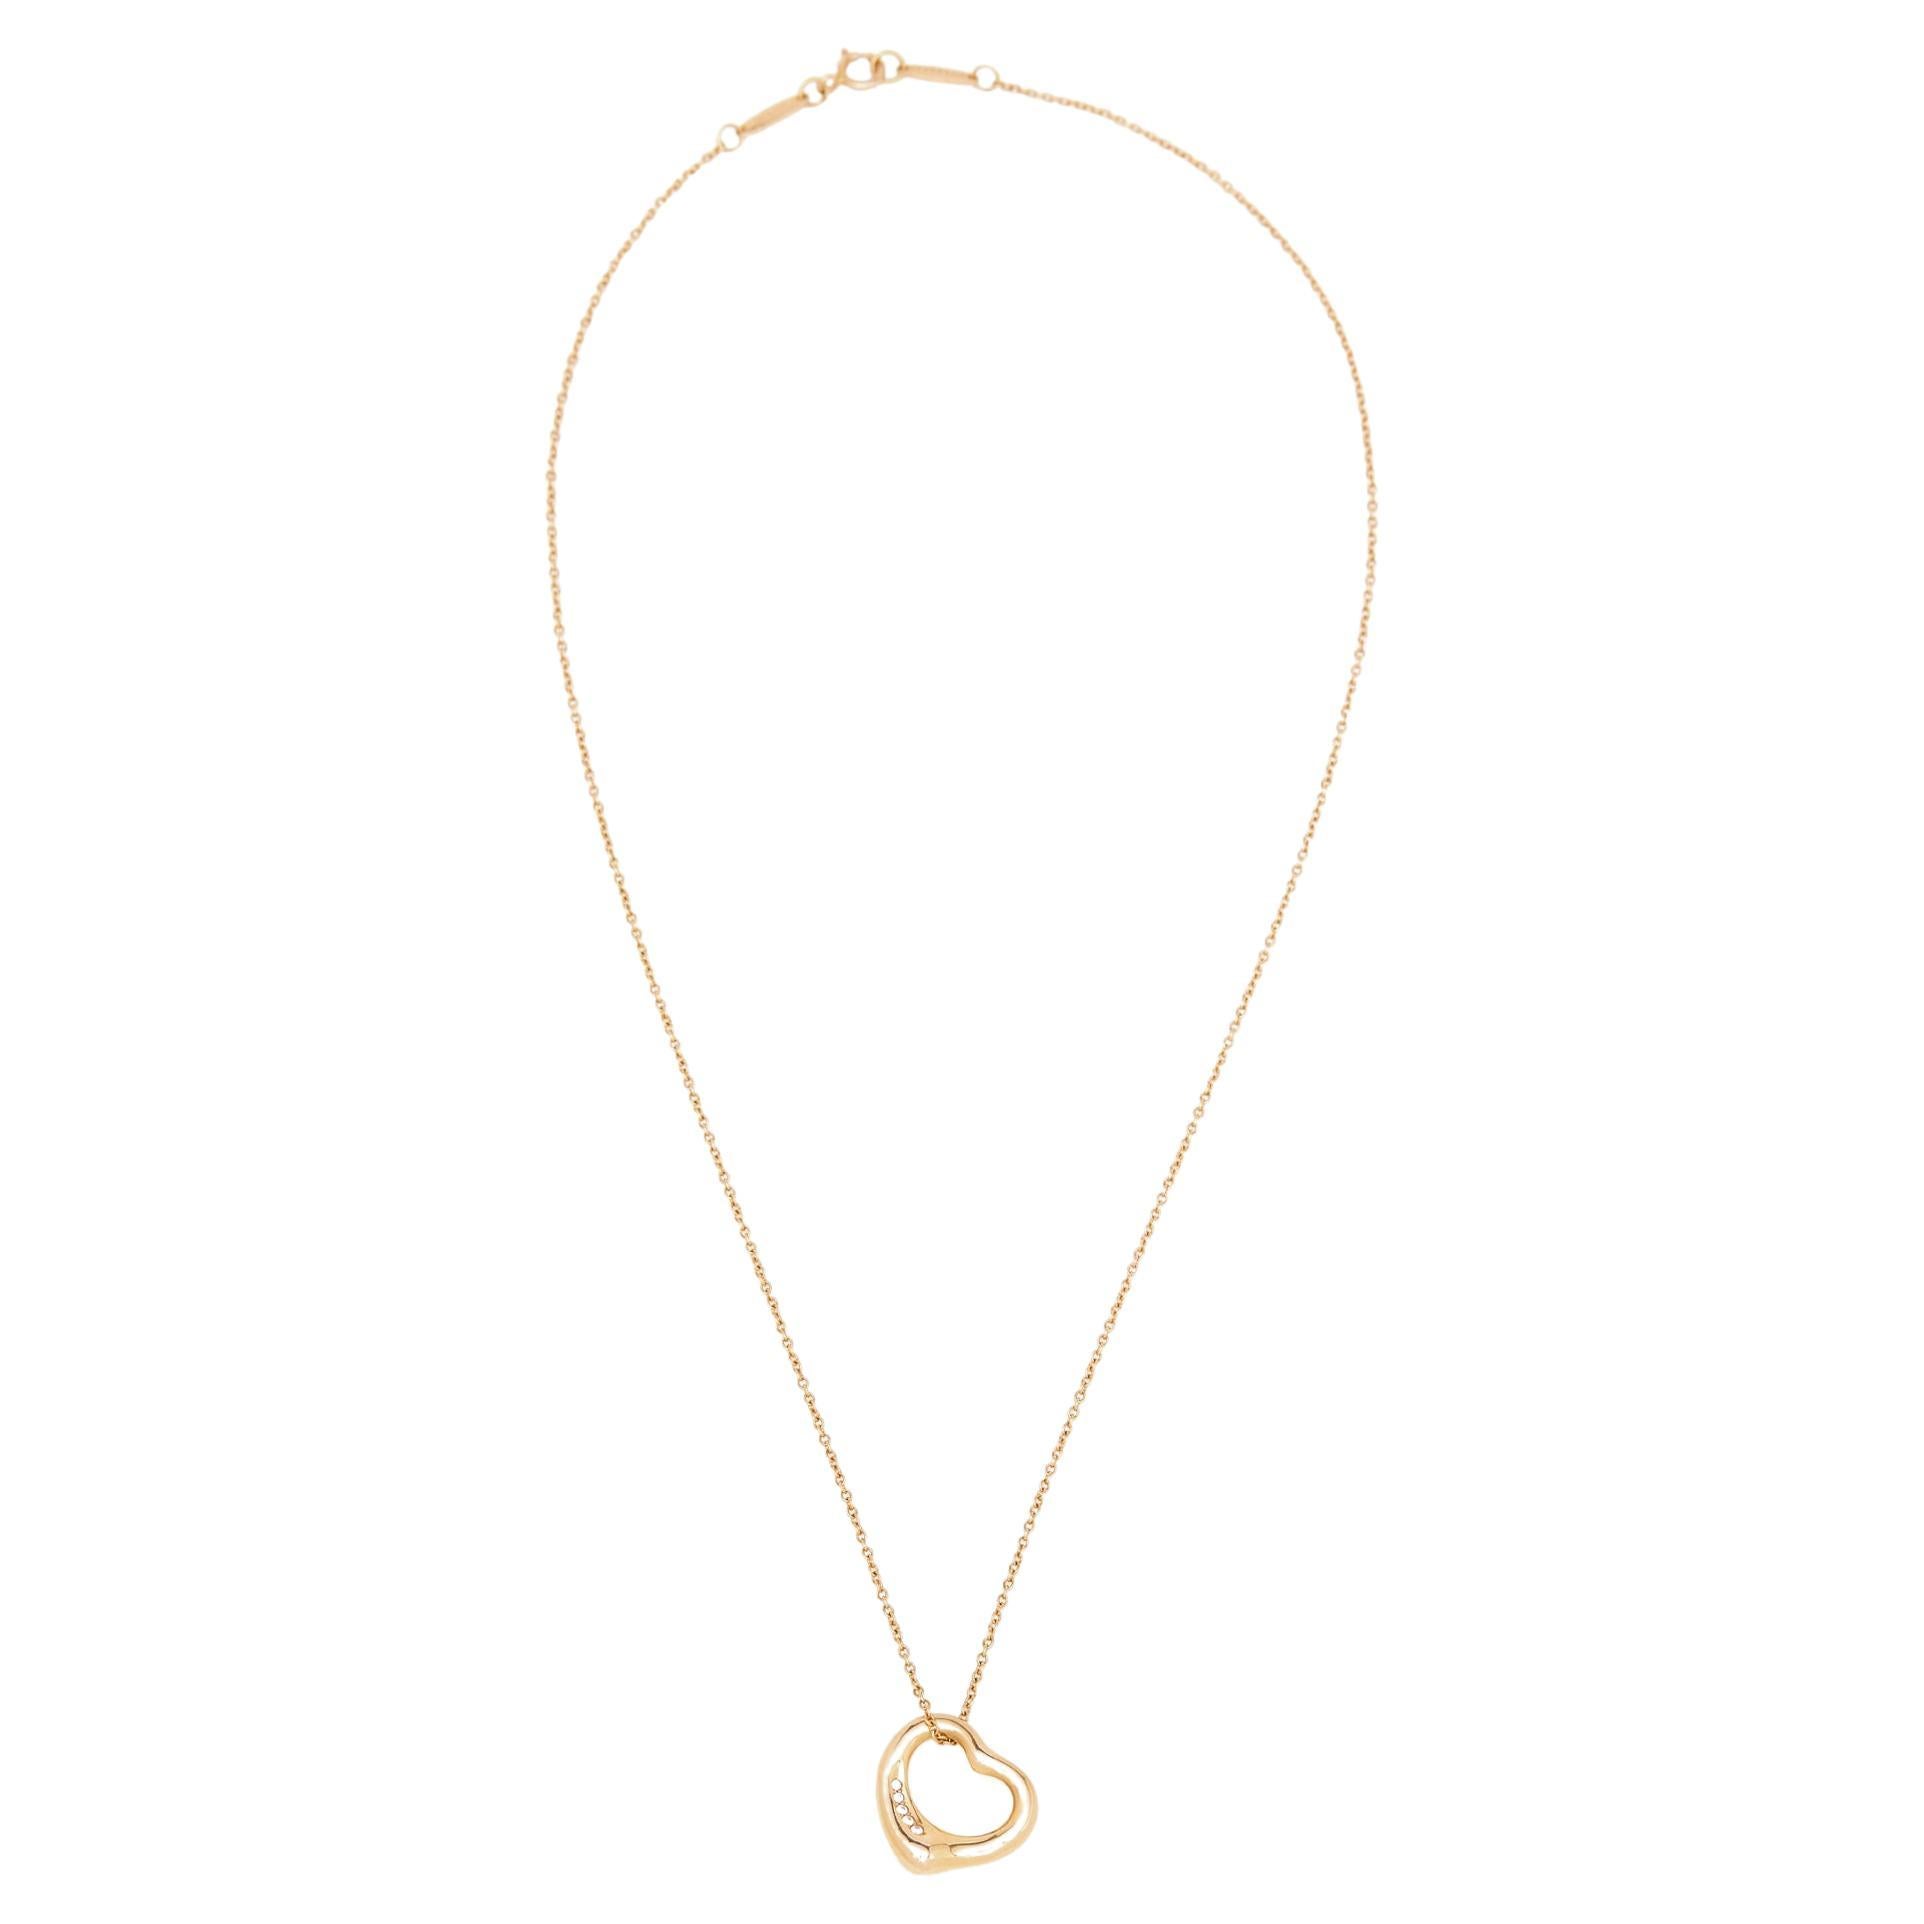 Immerse in the spirit of eternal love with this charming Tiffany & Co. Elsa Peretti Open Heart necklace. Featuring a heart motif and 5 diamonds, this alluring and evocative 18K rose gold necklace is designed to be an everyday